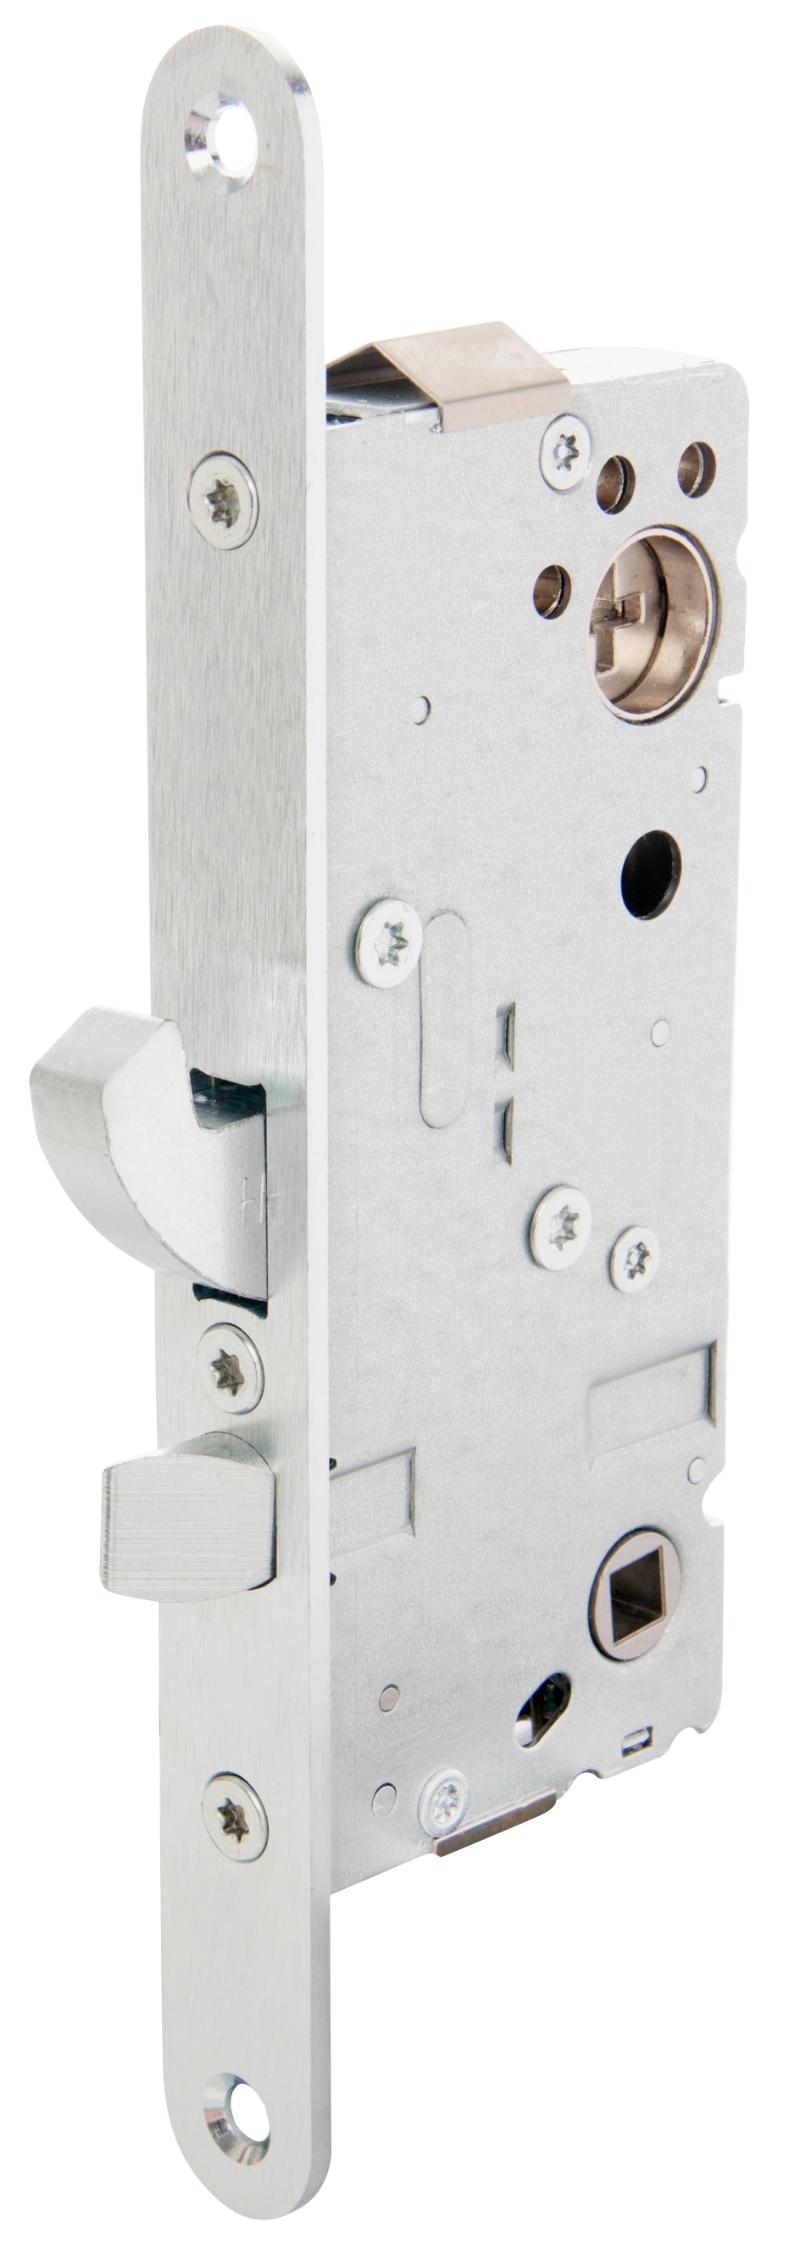 Assa locking box Connect 510/50 H, with micro switch (968473)